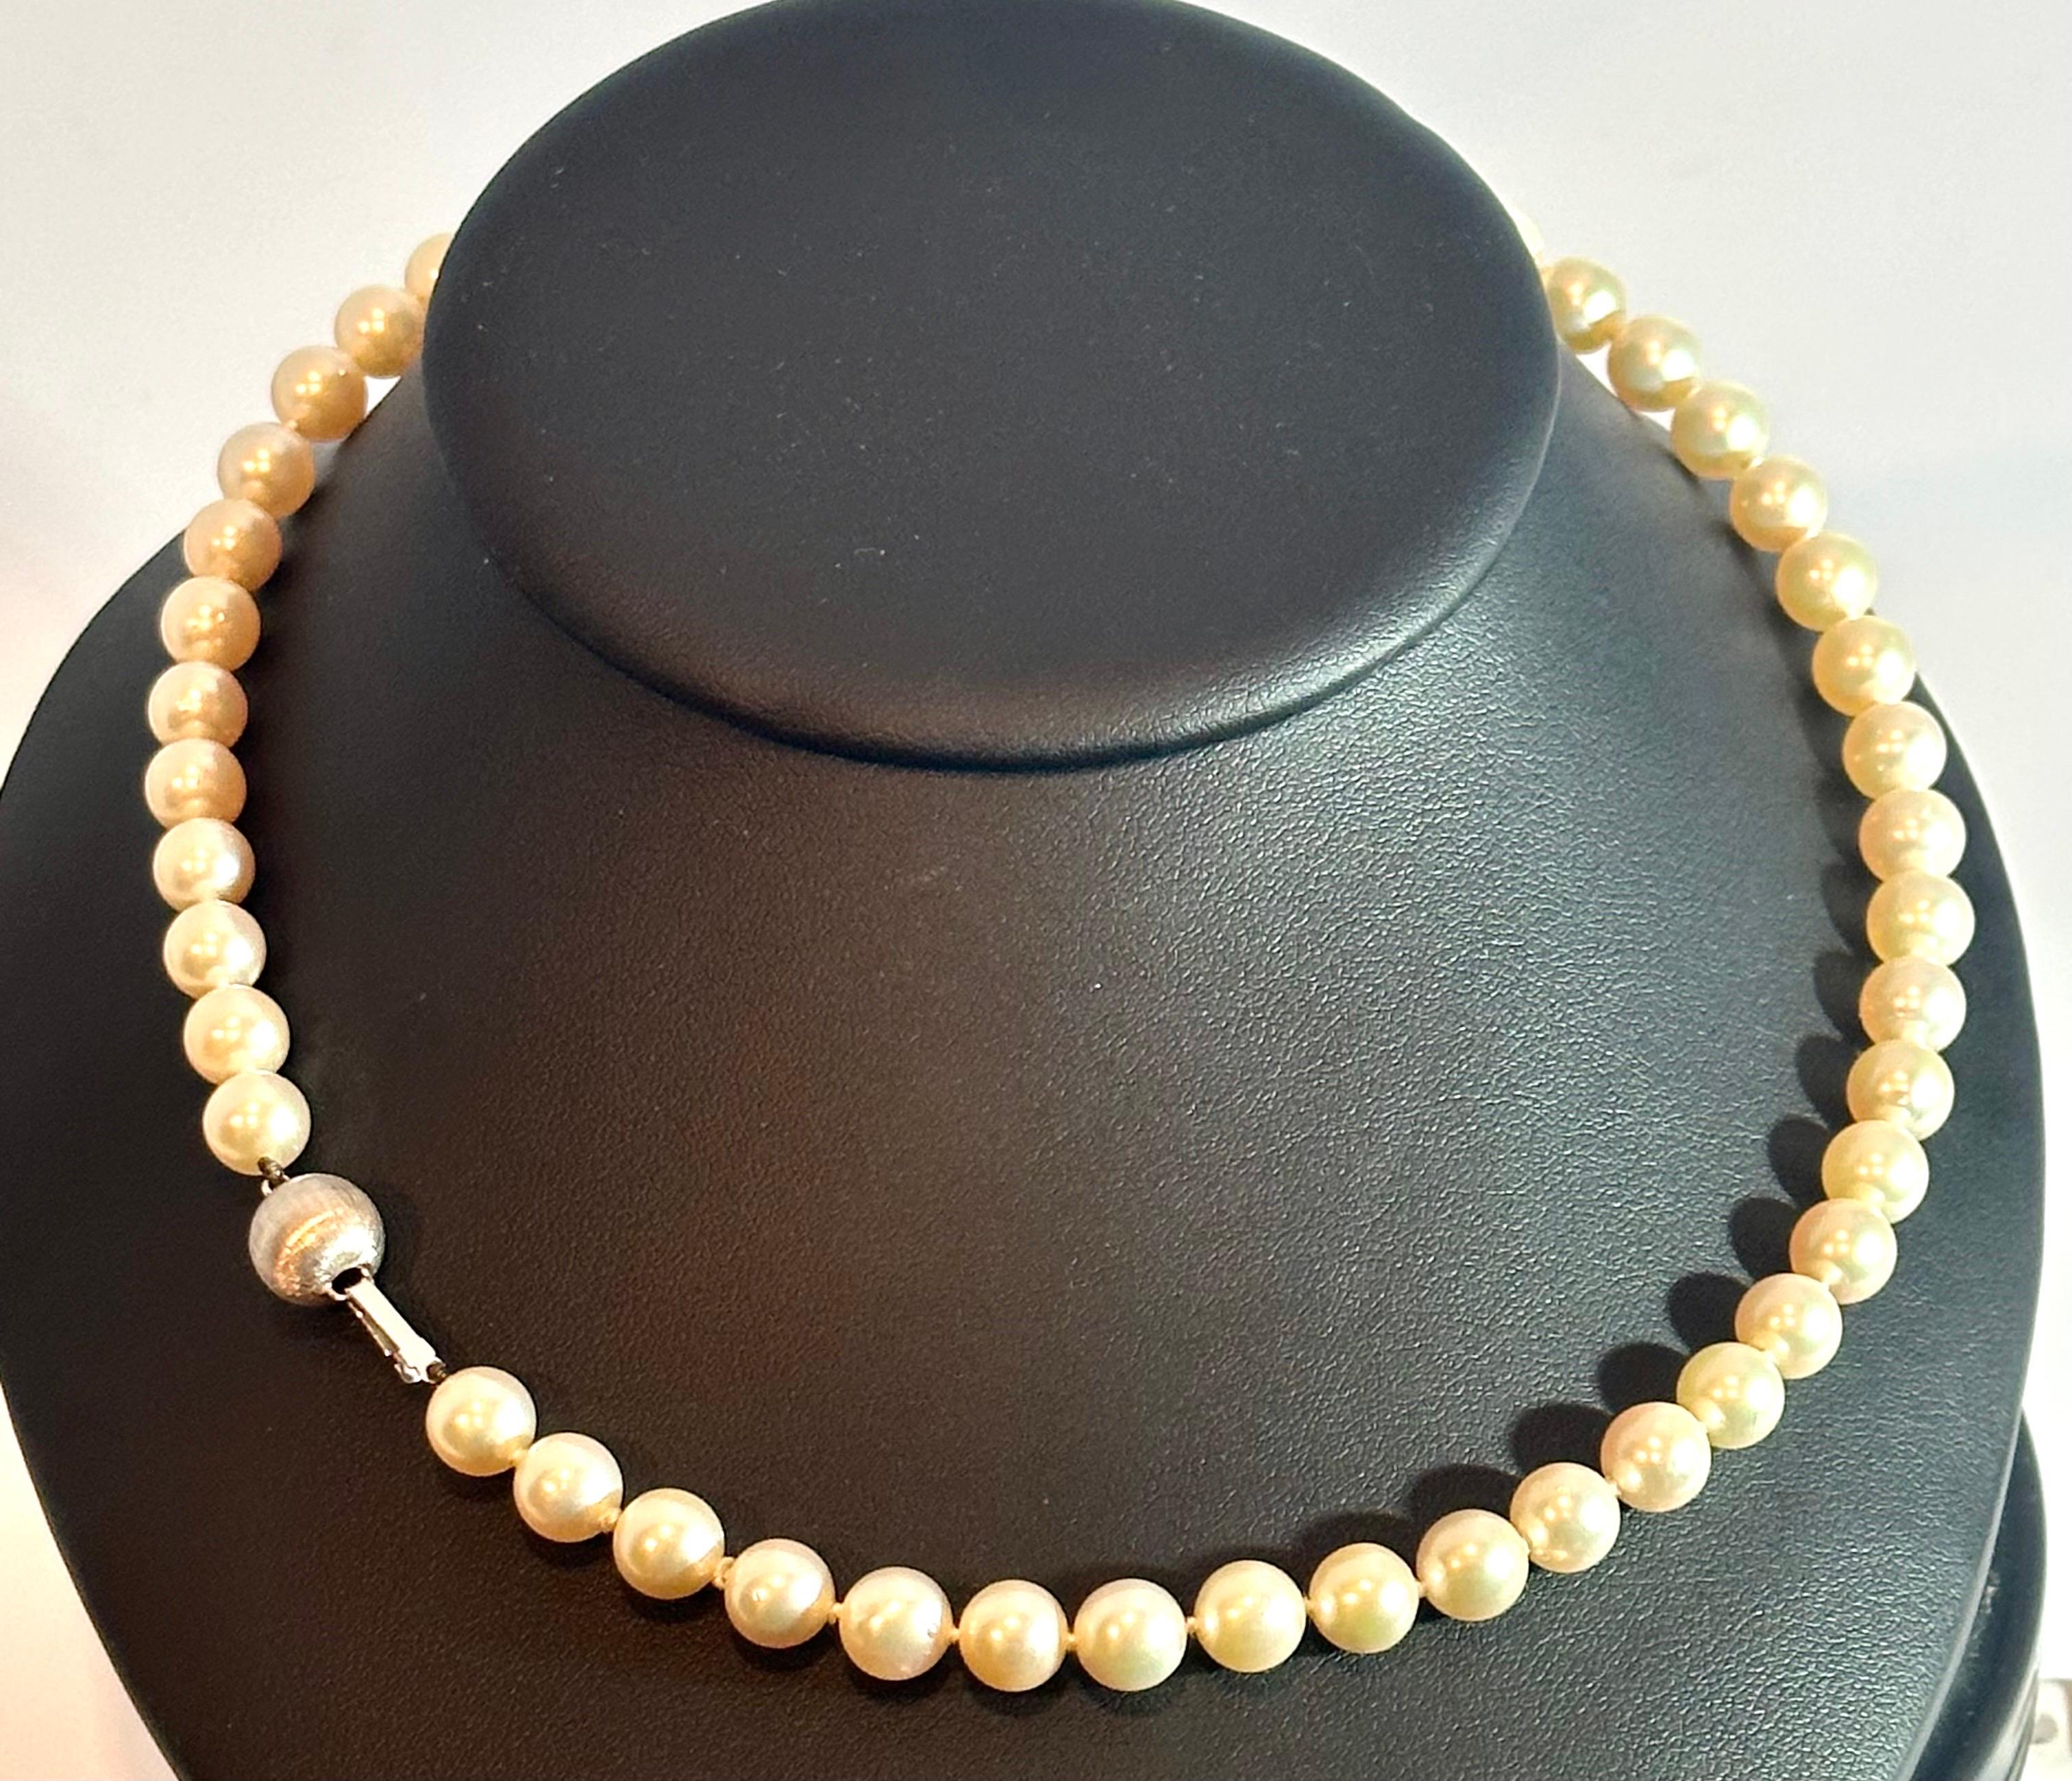 Women's Vintage Cultured Akoya Pearl  Necklace Length 18